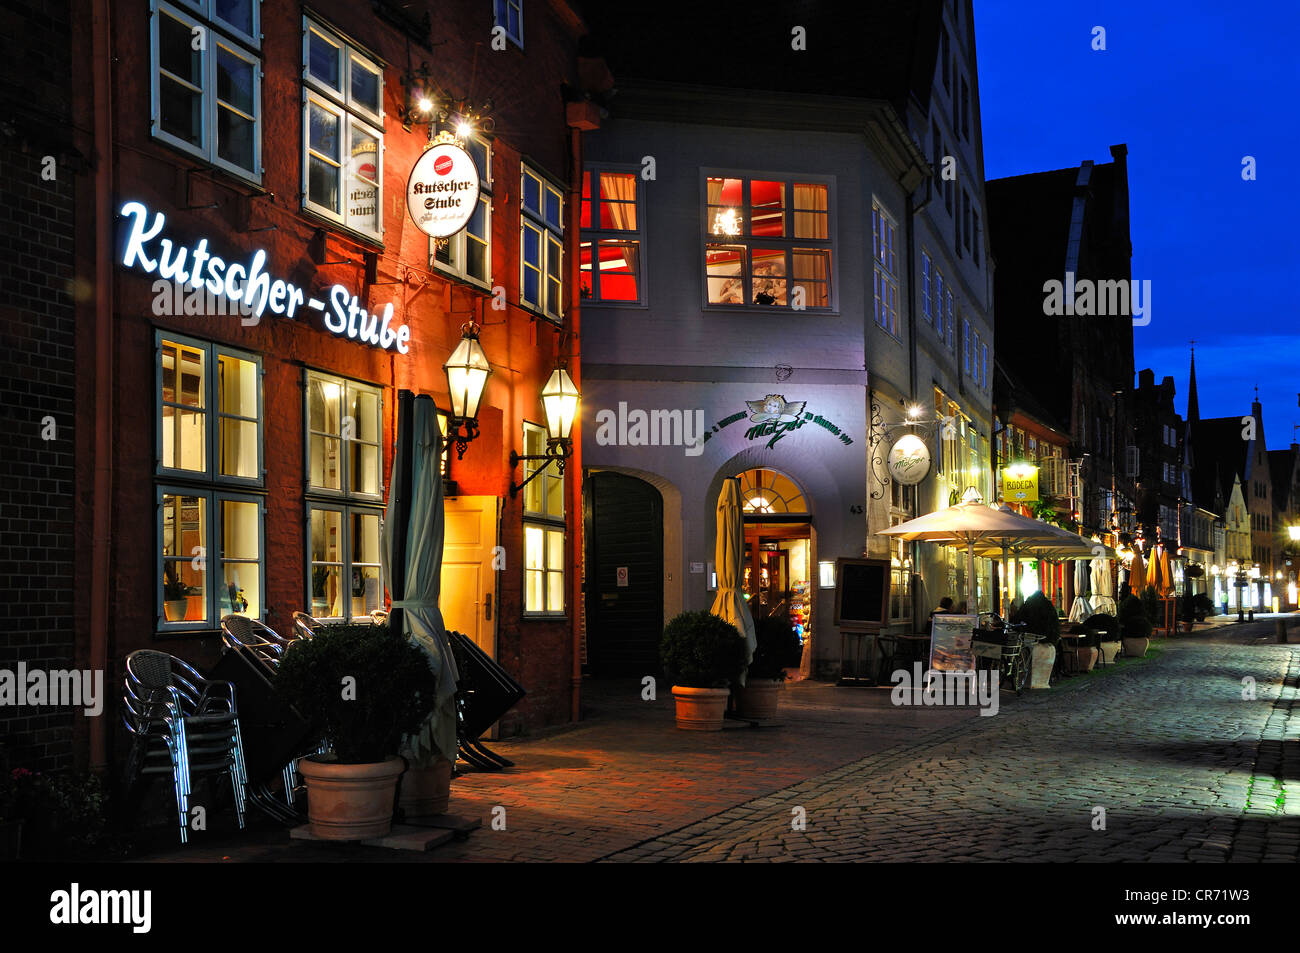 Street scene at night with cafes and restaurants, Heiliggeiststrasse, Lueneburg, Lower Saxony, Germany, Europe Stock Photo